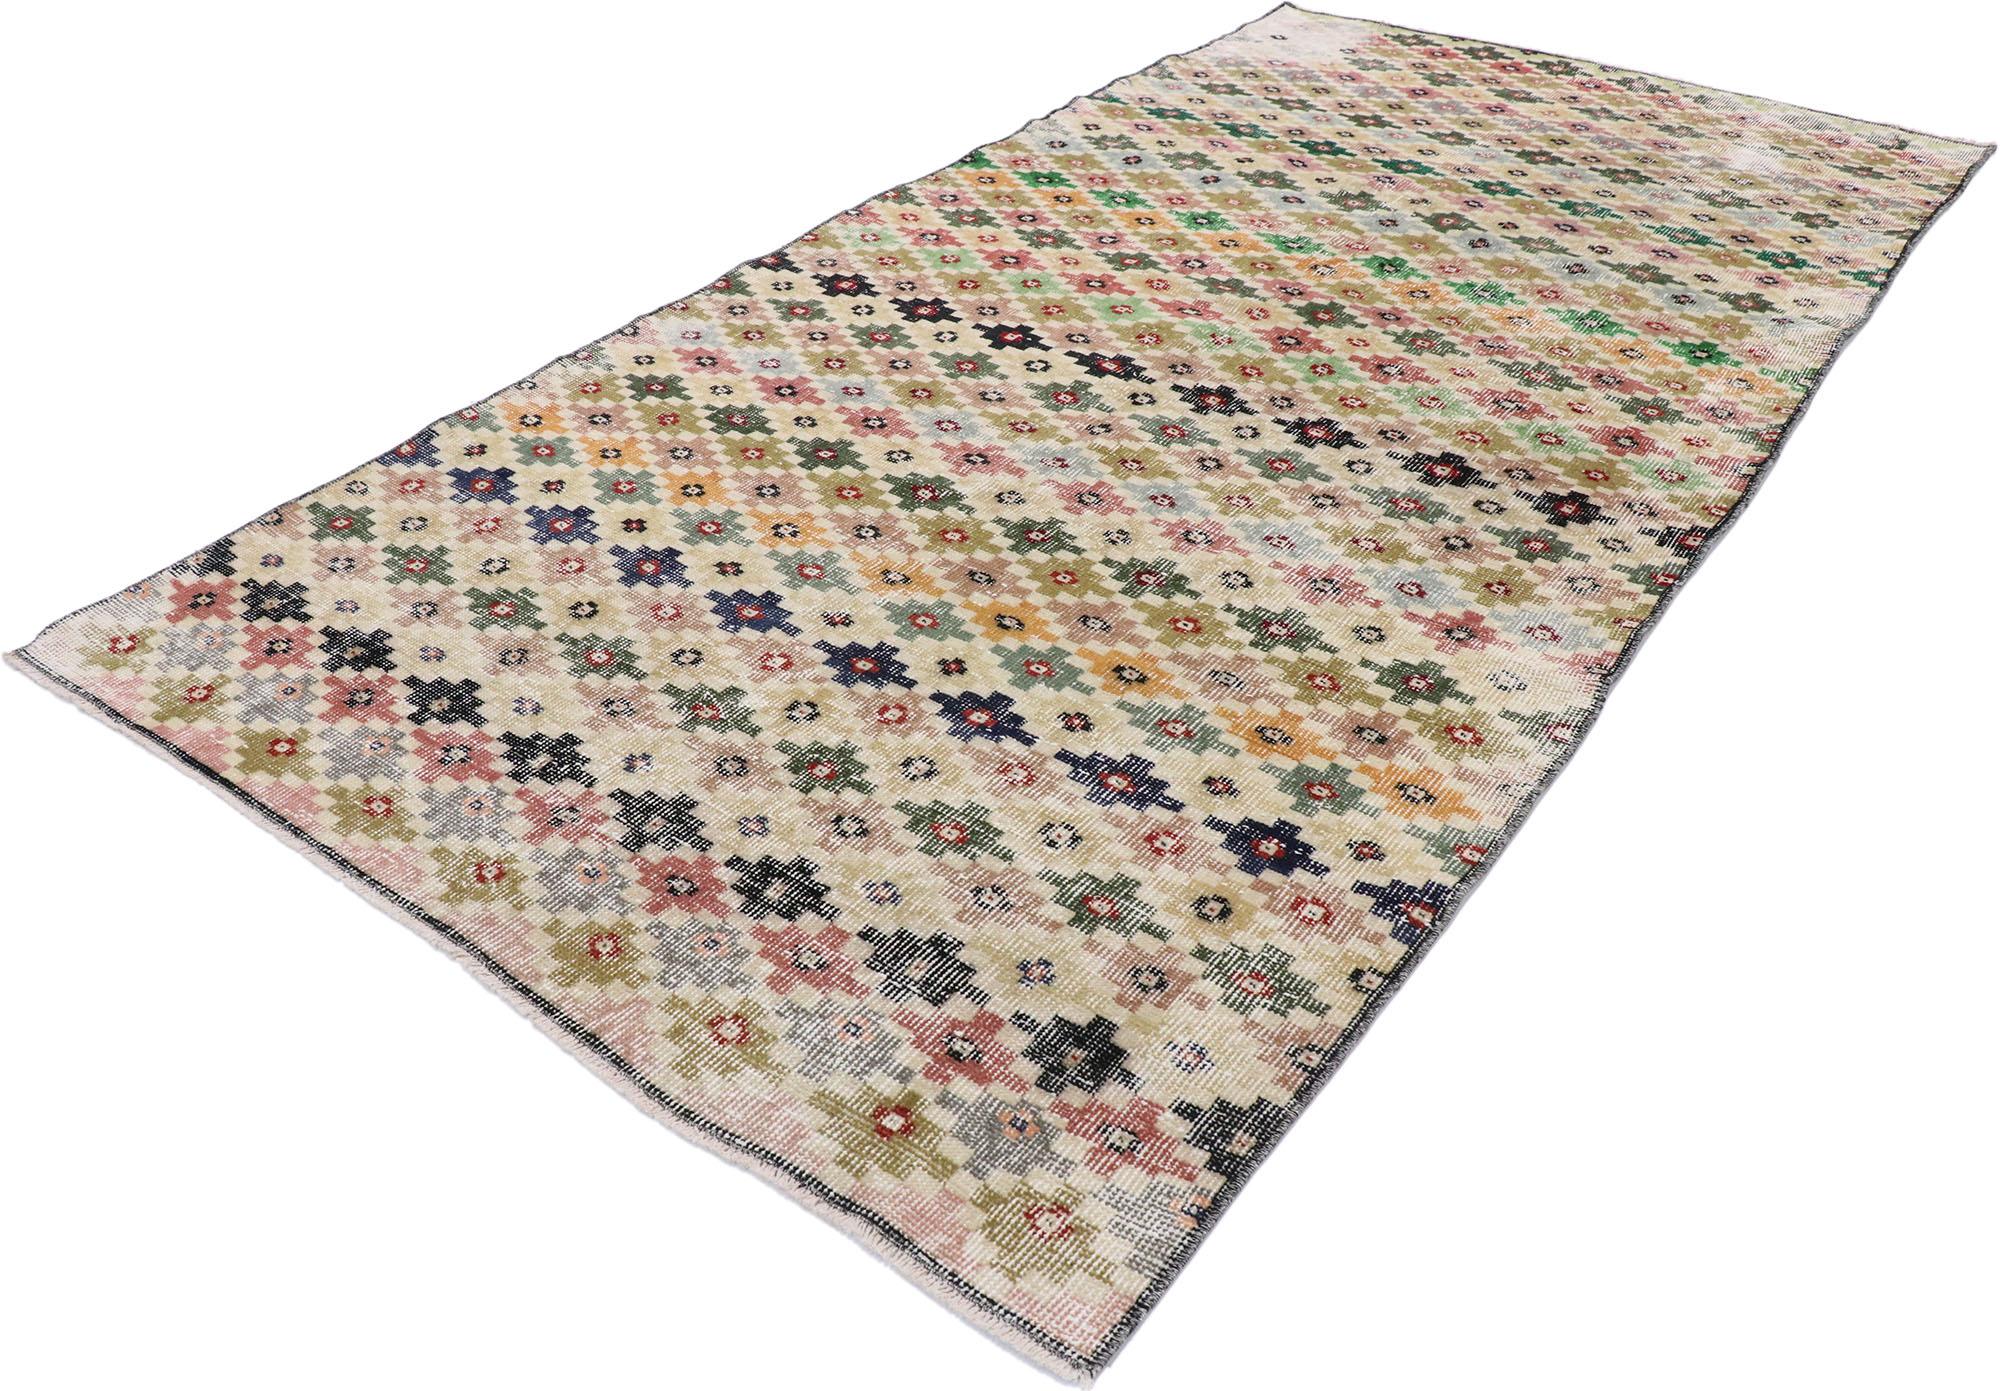 53291, distressed vintage Turkish Sivas rug with Rustic Mid-Century Modern style. This hand knotted wool distressed vintage Turkish Sivas rug features an all-over repeating pattern comprised of multicolored concentric stepped star motifs. Gentle